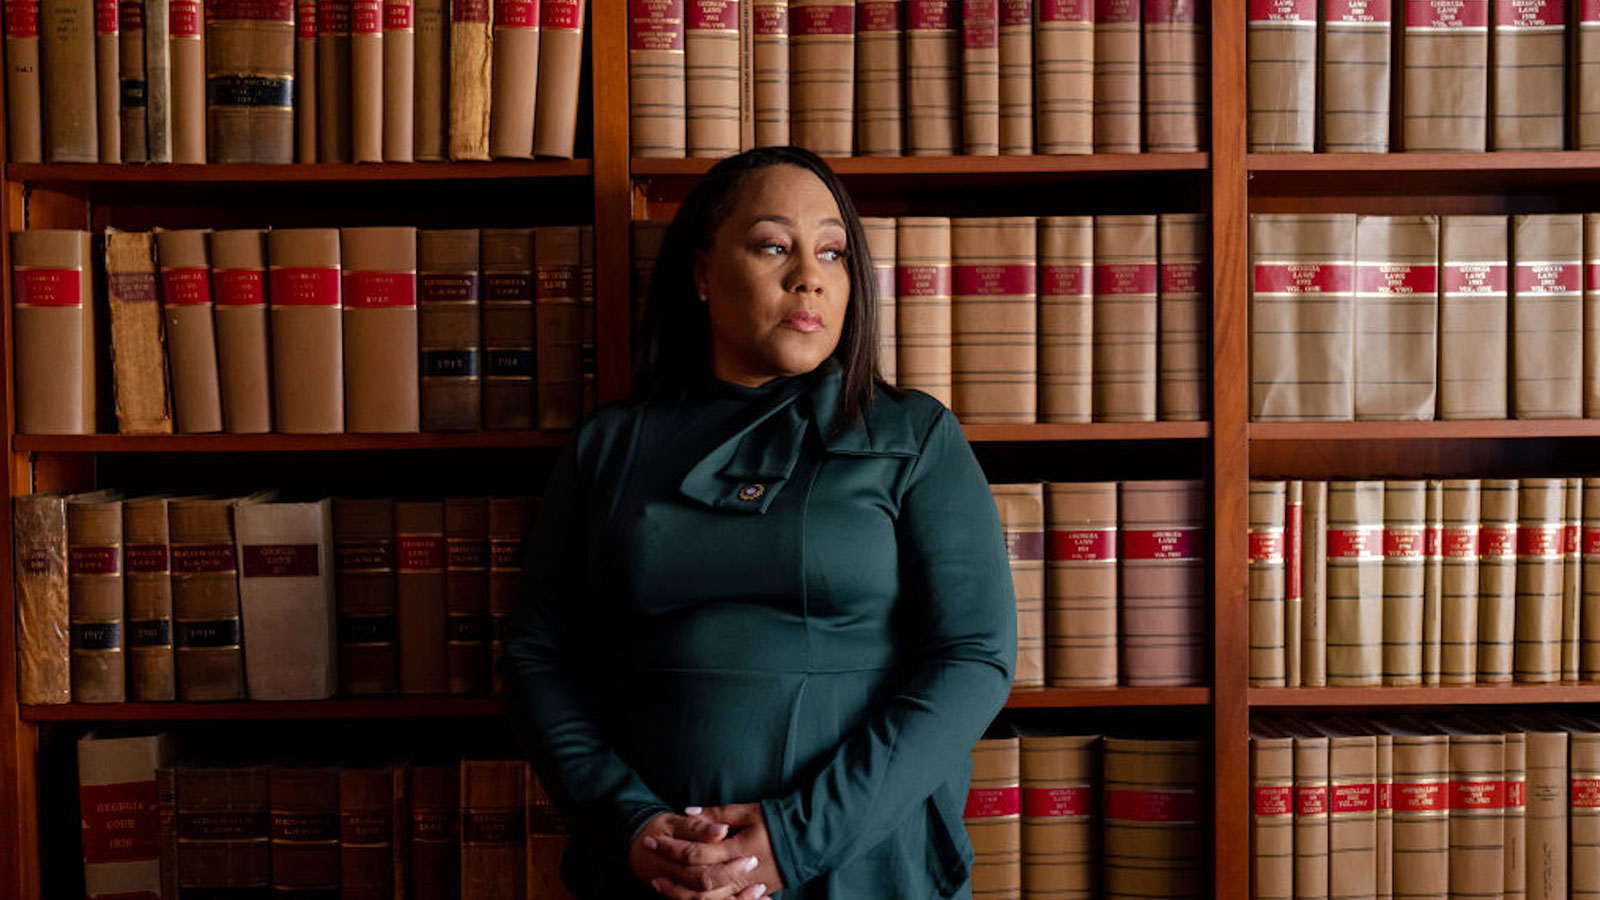 Black female prosecutors like Fani Willis face the unequal burden of both racist and sexist attacks